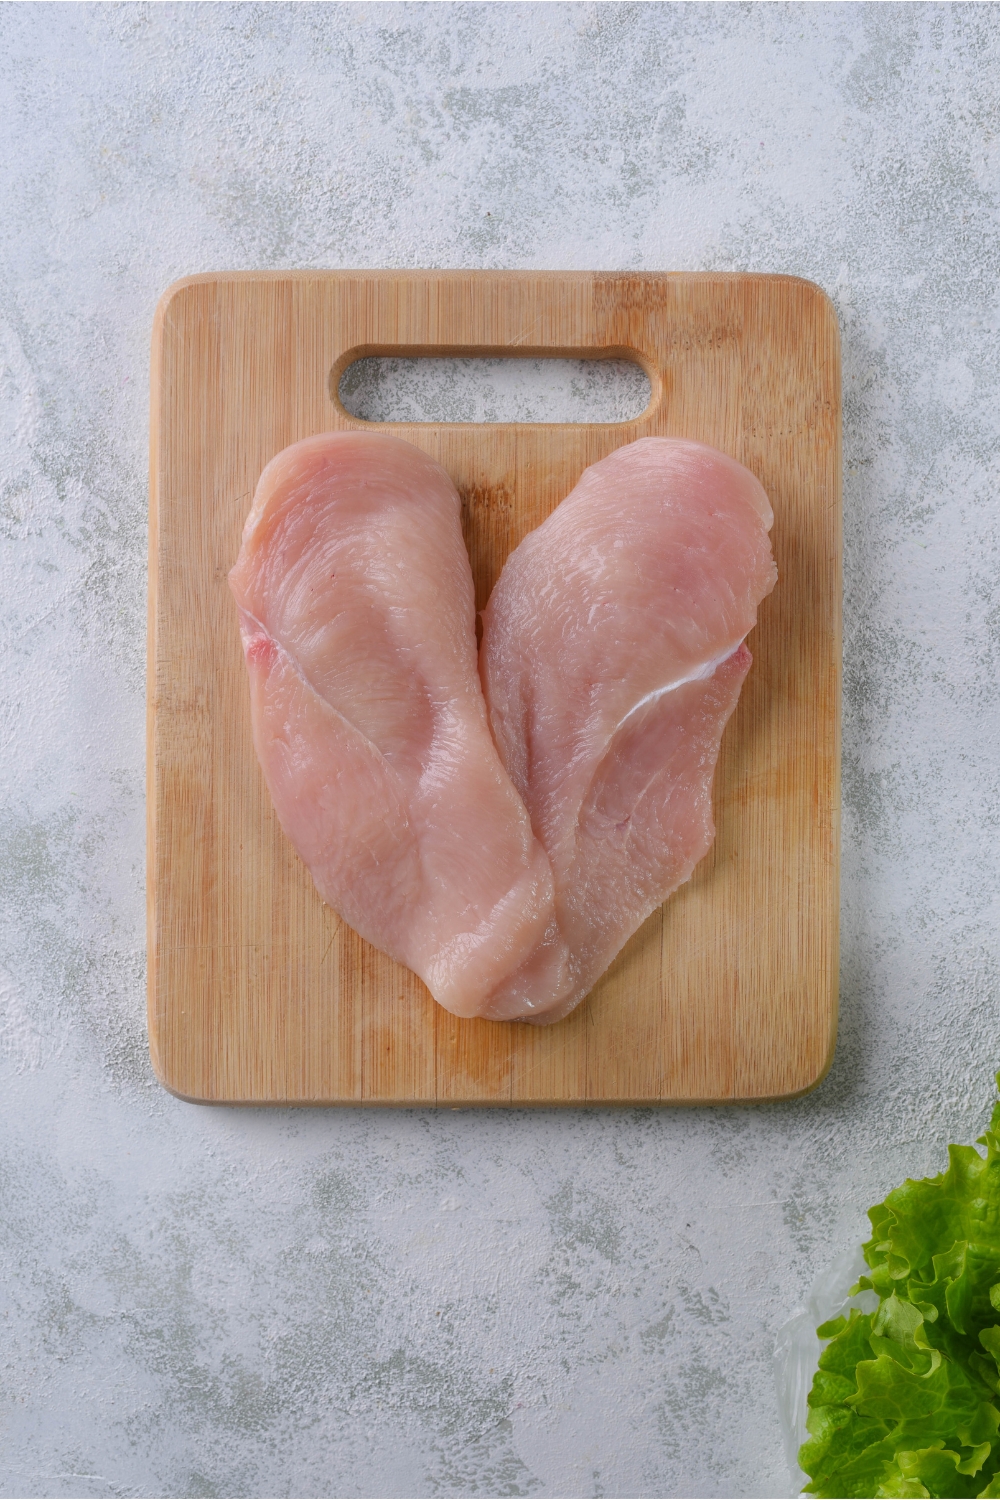 A wood cutting board with two raw chicken breast cutlets on it.